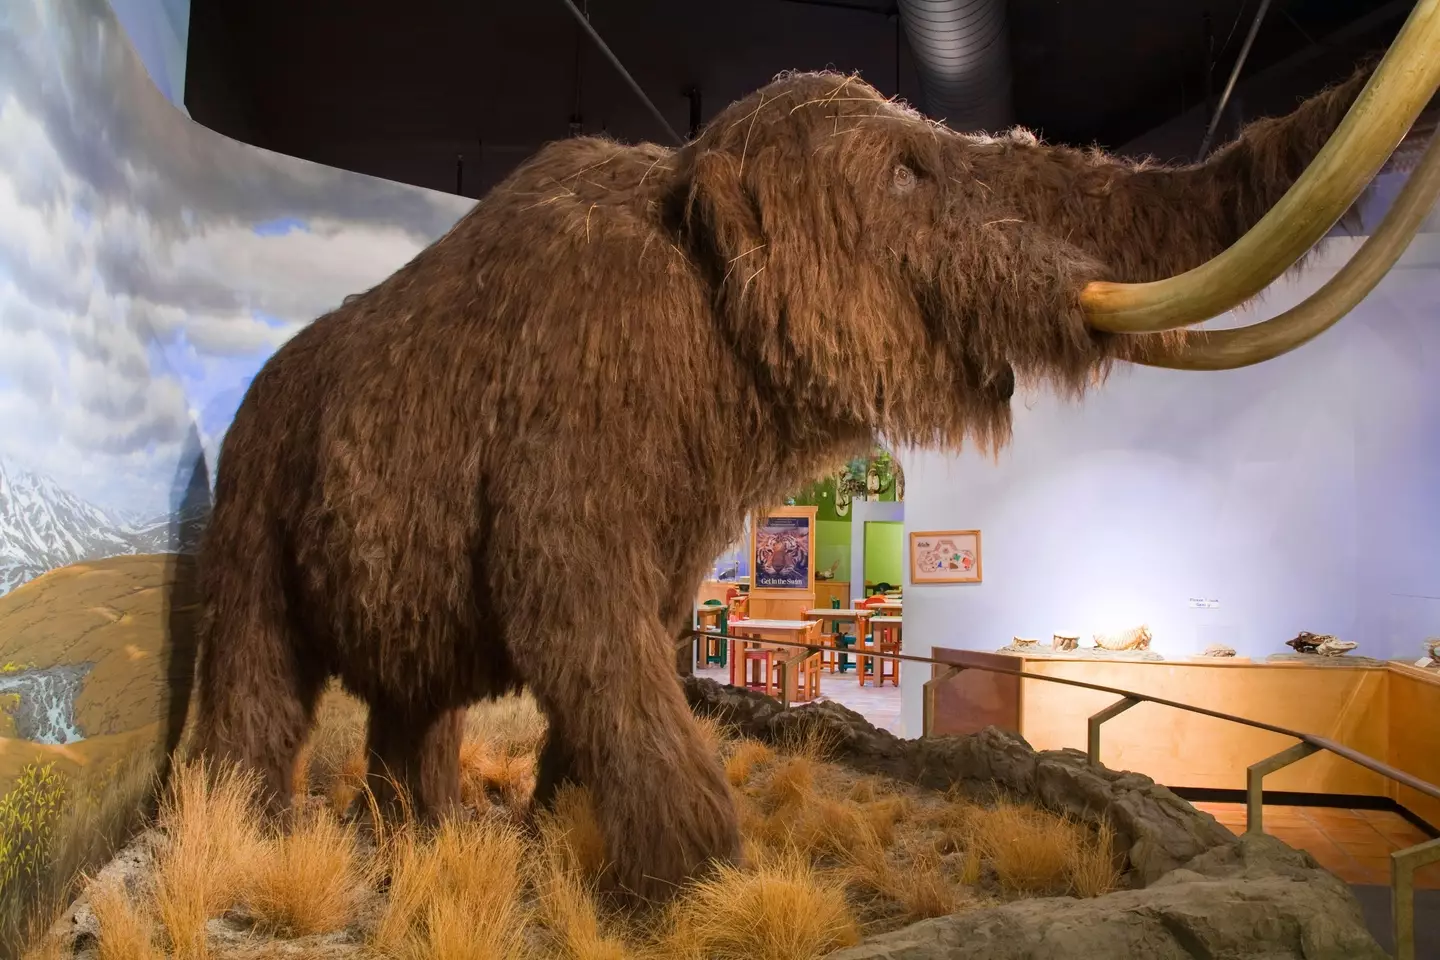 The woolly mammoth could make a return by 2027.